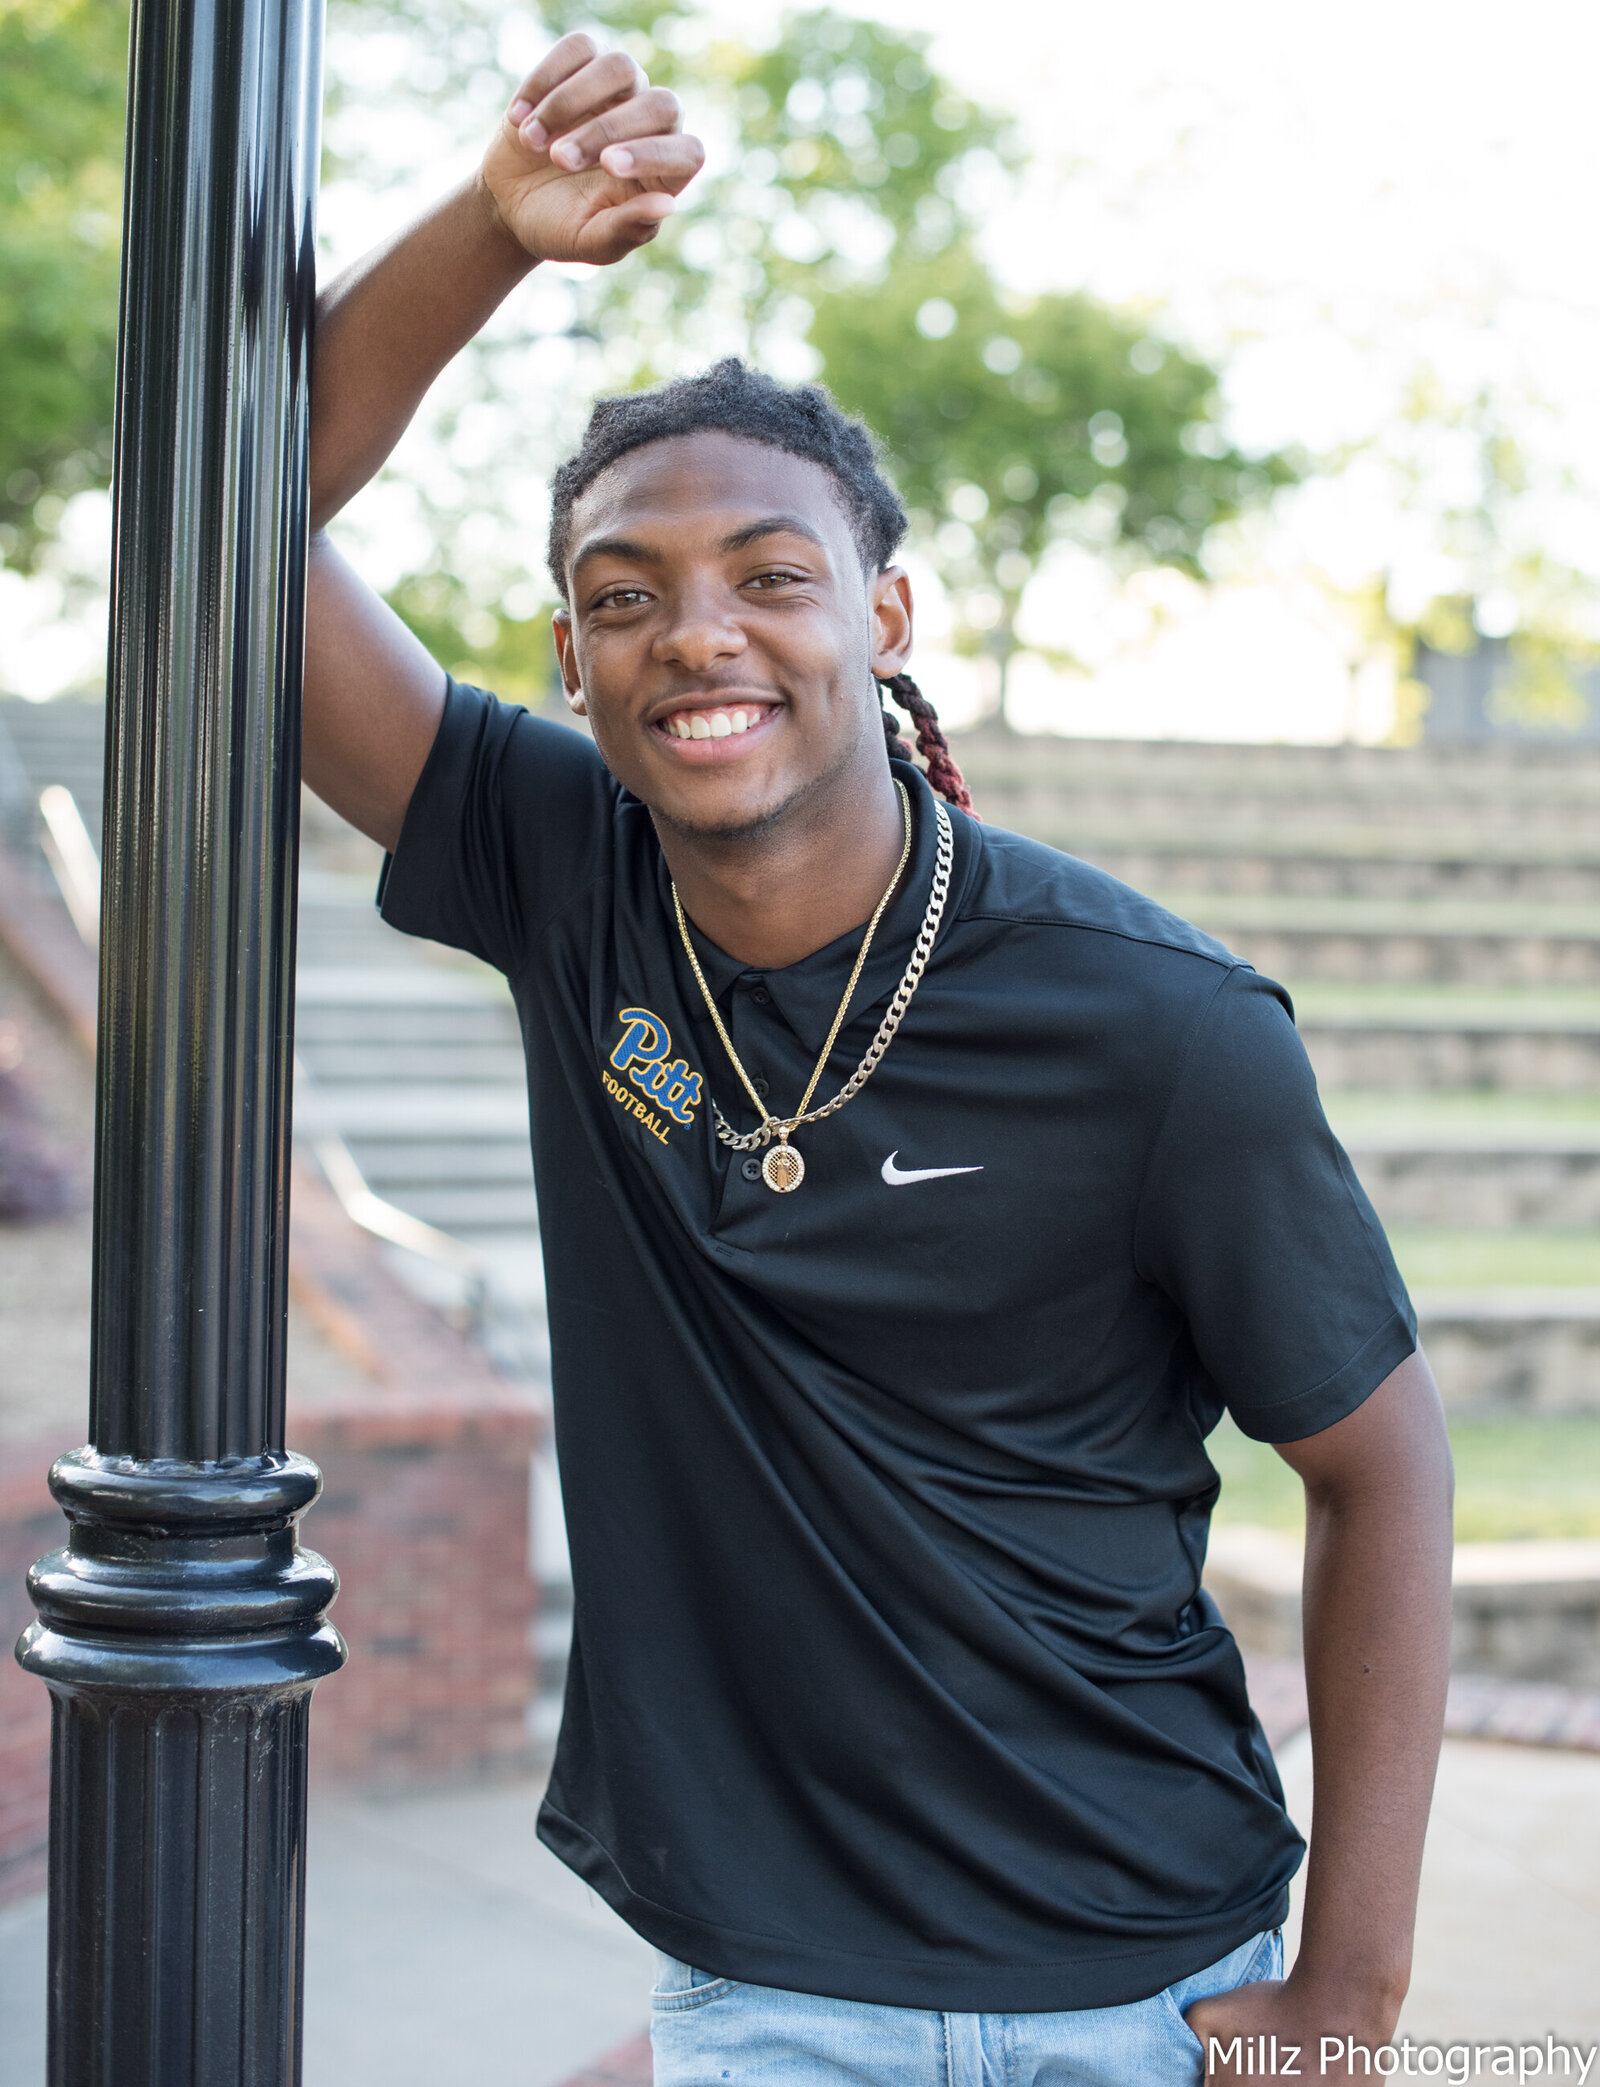 a senior dressed in a black nike shirt leaning against a light pole as he poses for his graduation photos. photographed by Millz Photography in Greenville, SC